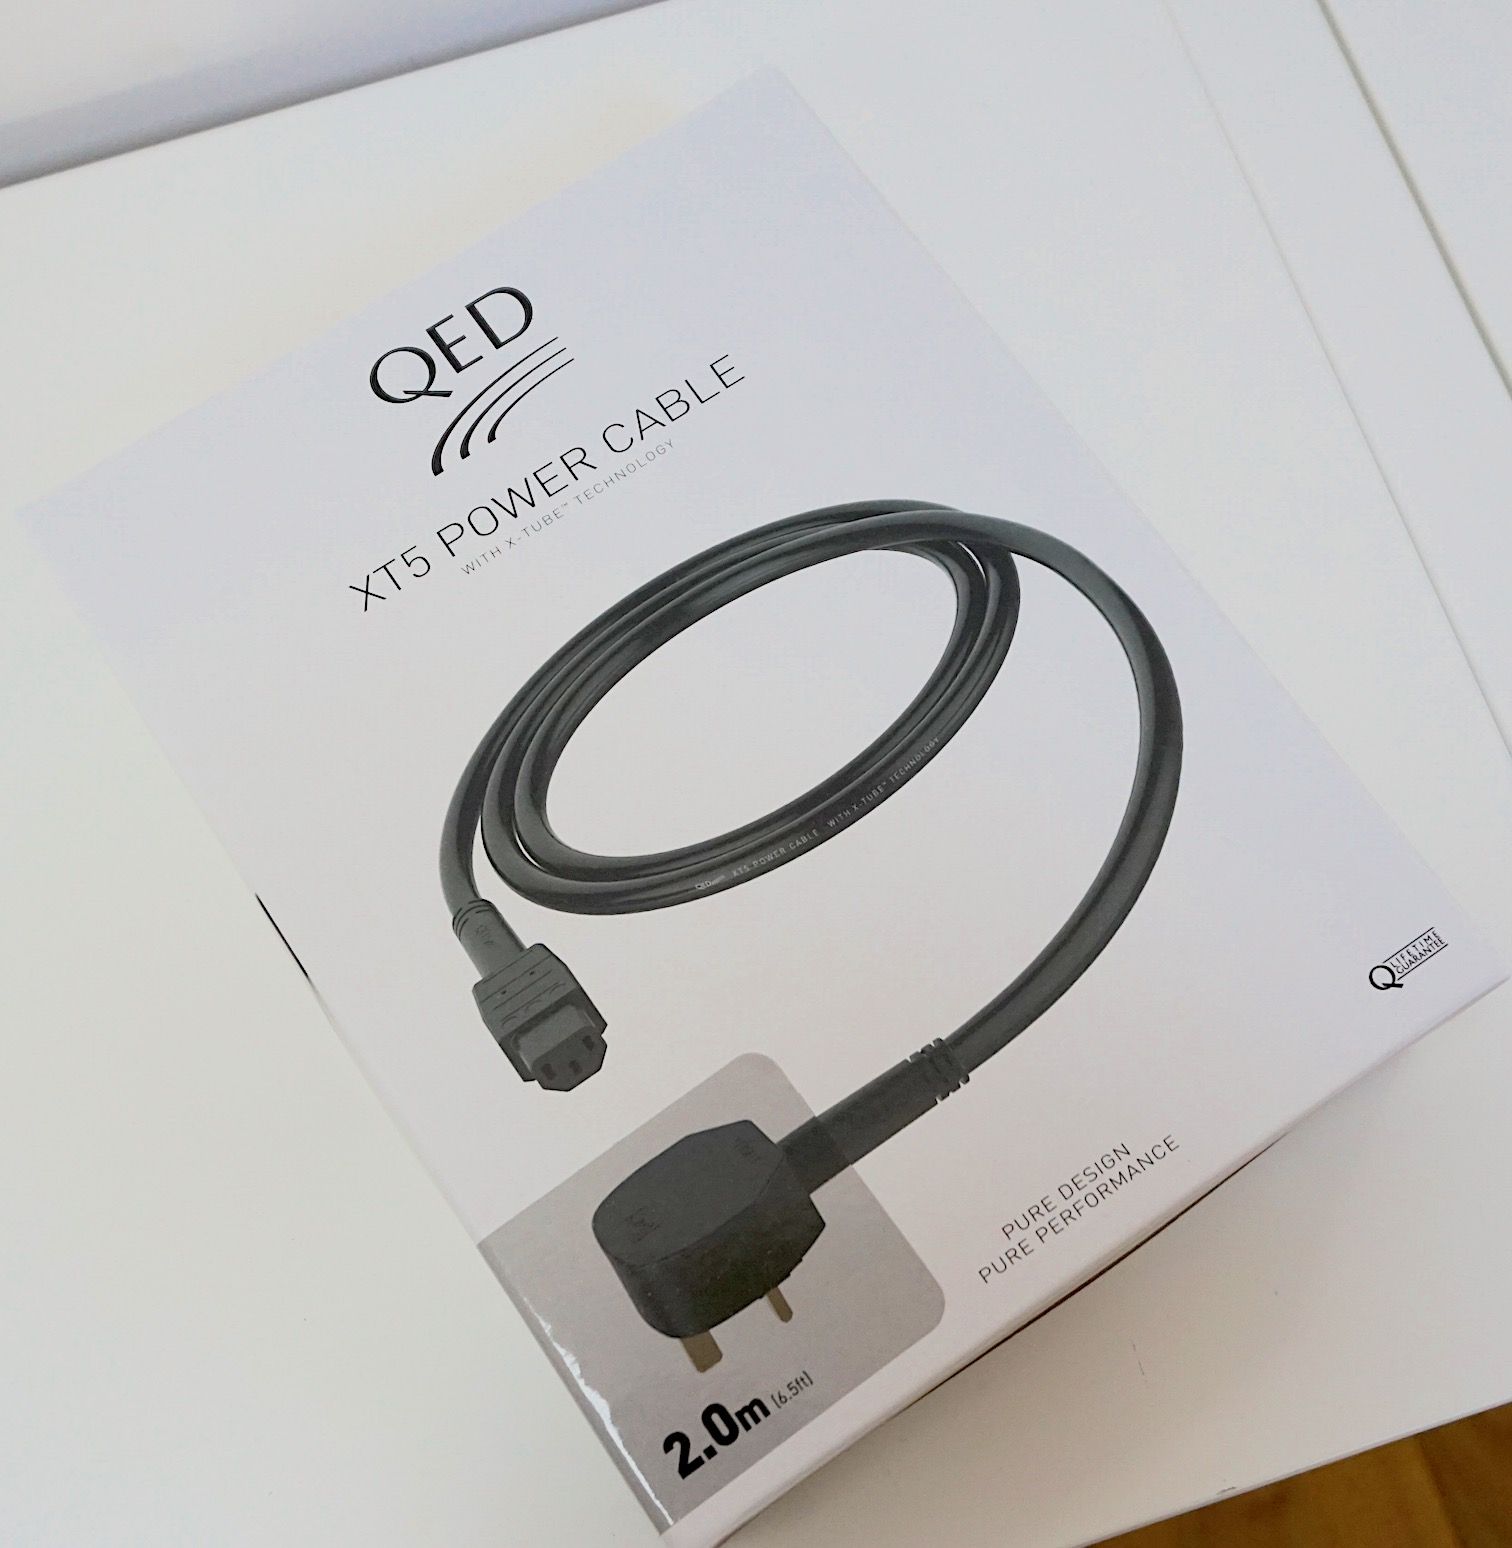 XT5 Mains Cable From QED